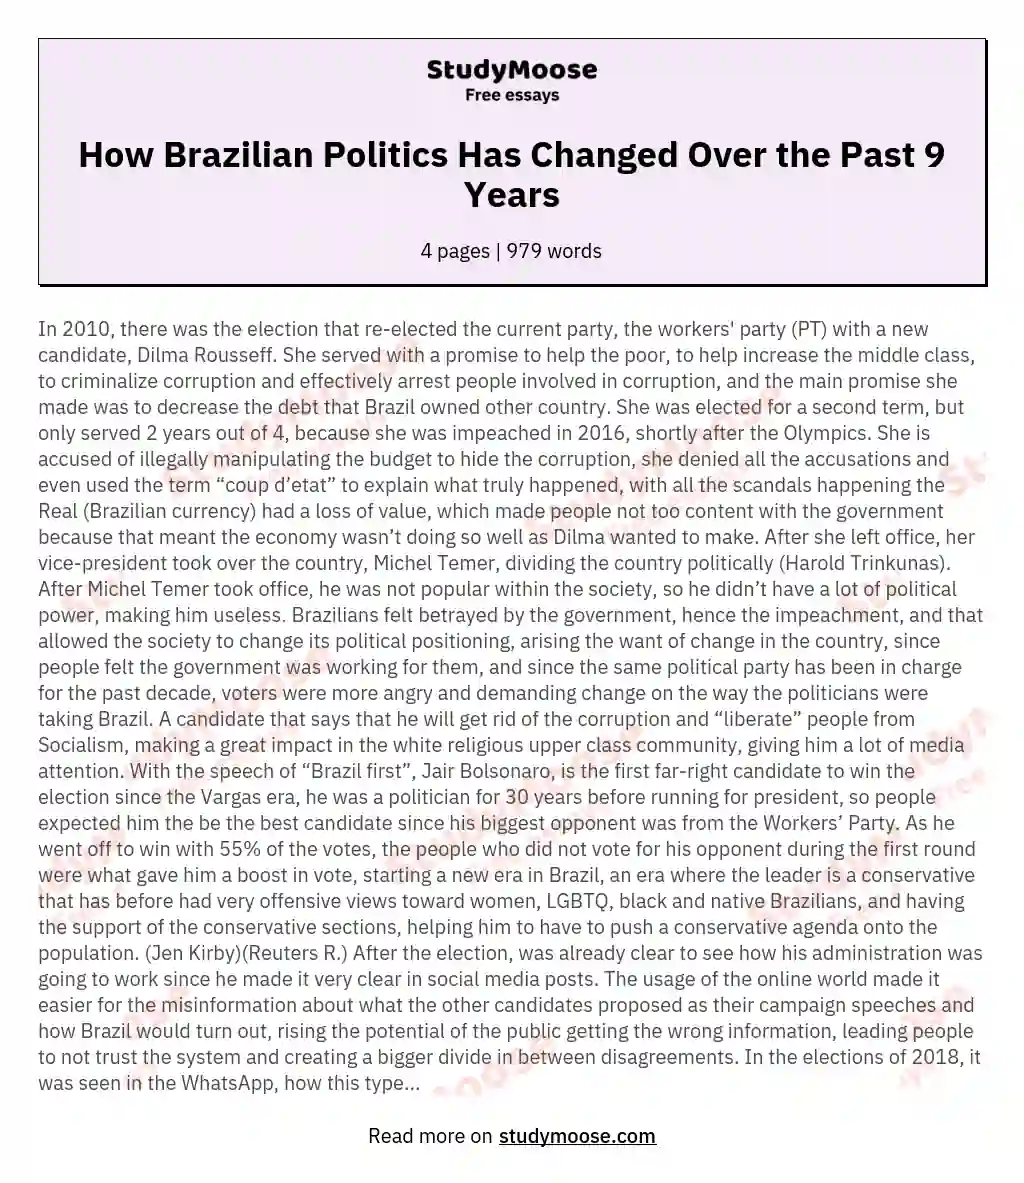 How Brazilian Politics Has Changed Over the Past 9 Years essay